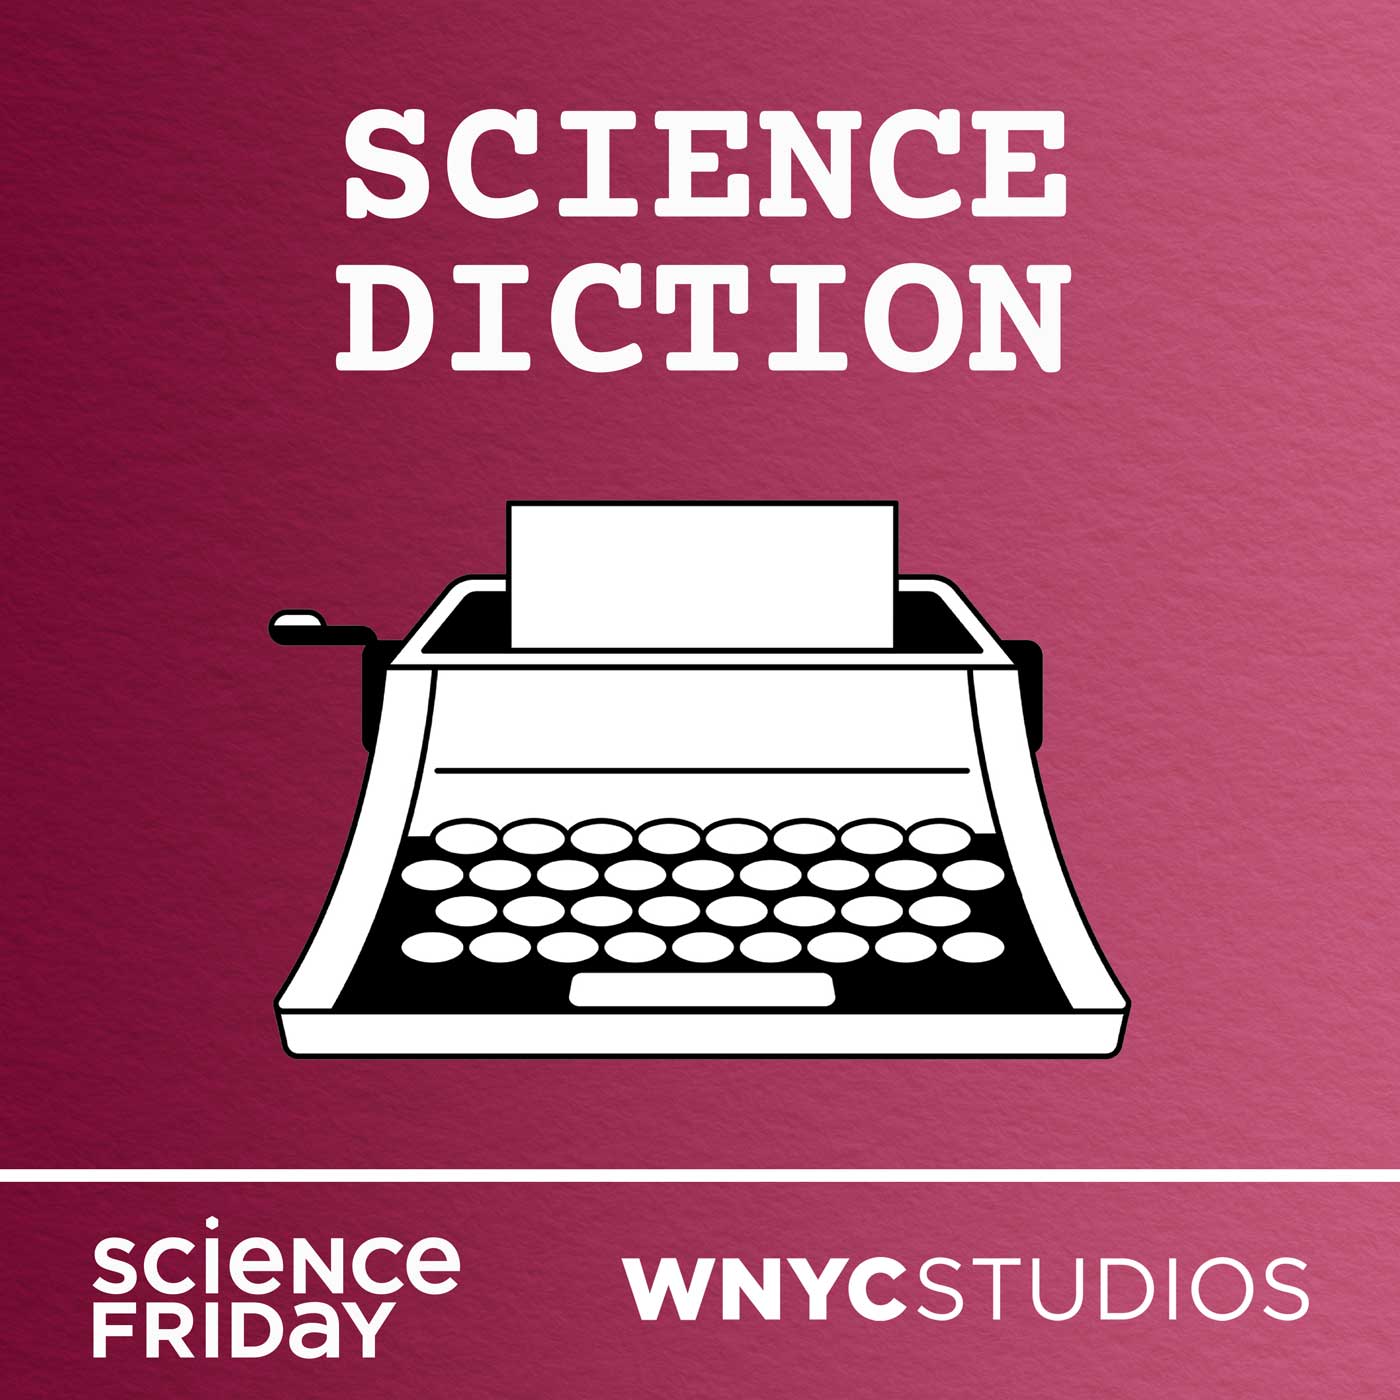 album artwork that says 'science diction', has a graphic of a typewriter, and says 'science friday and wnyc studios' at the bottom